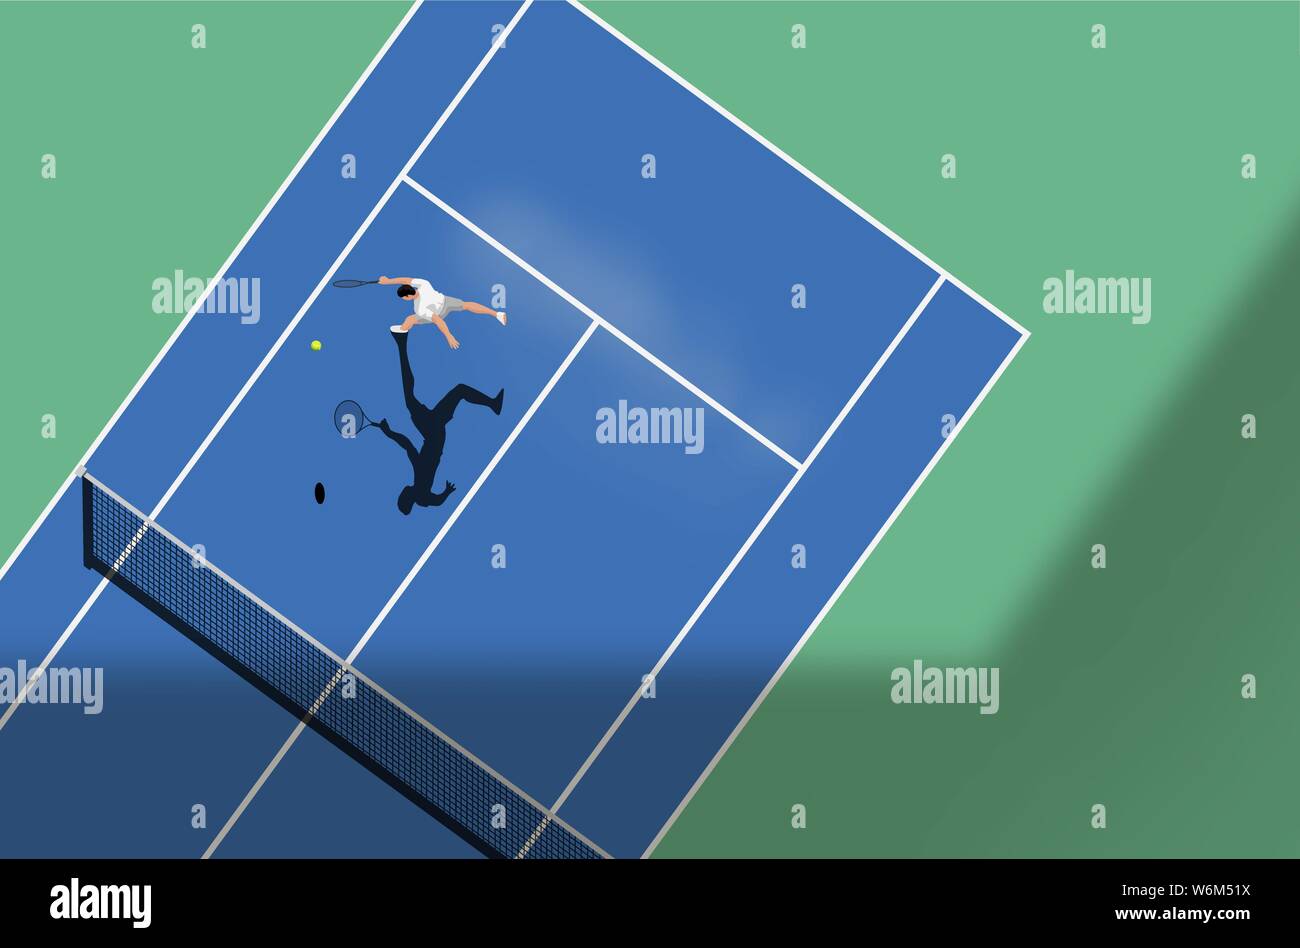 Tennis match on a hard court. Top down view of the sport, vector illustration. Stock Vector